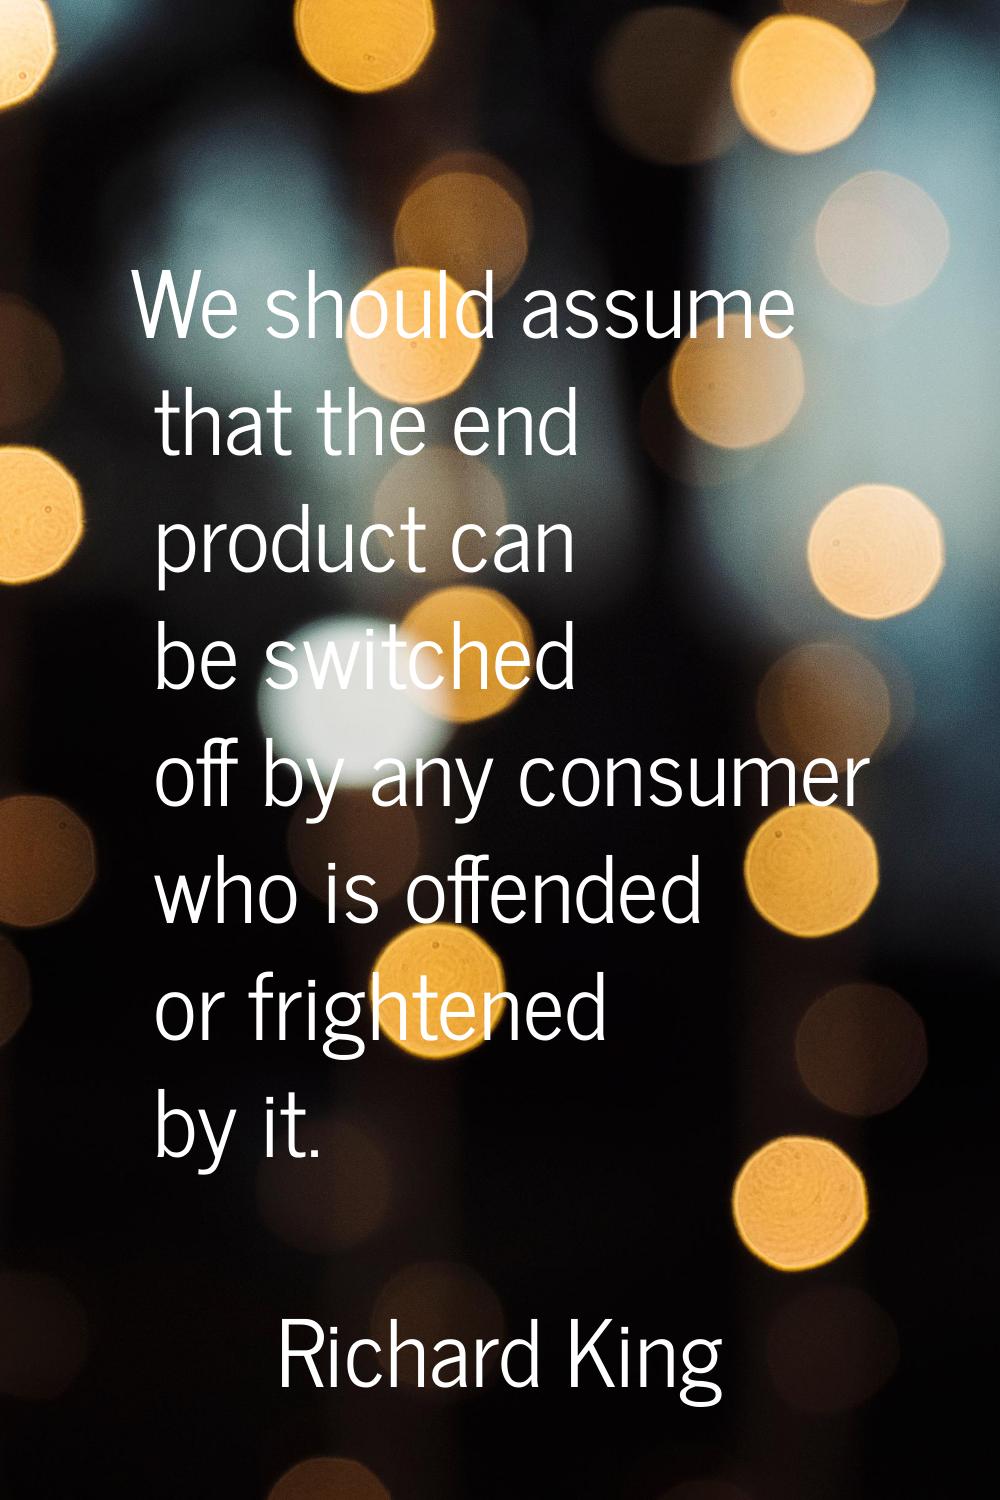 We should assume that the end product can be switched off by any consumer who is offended or fright